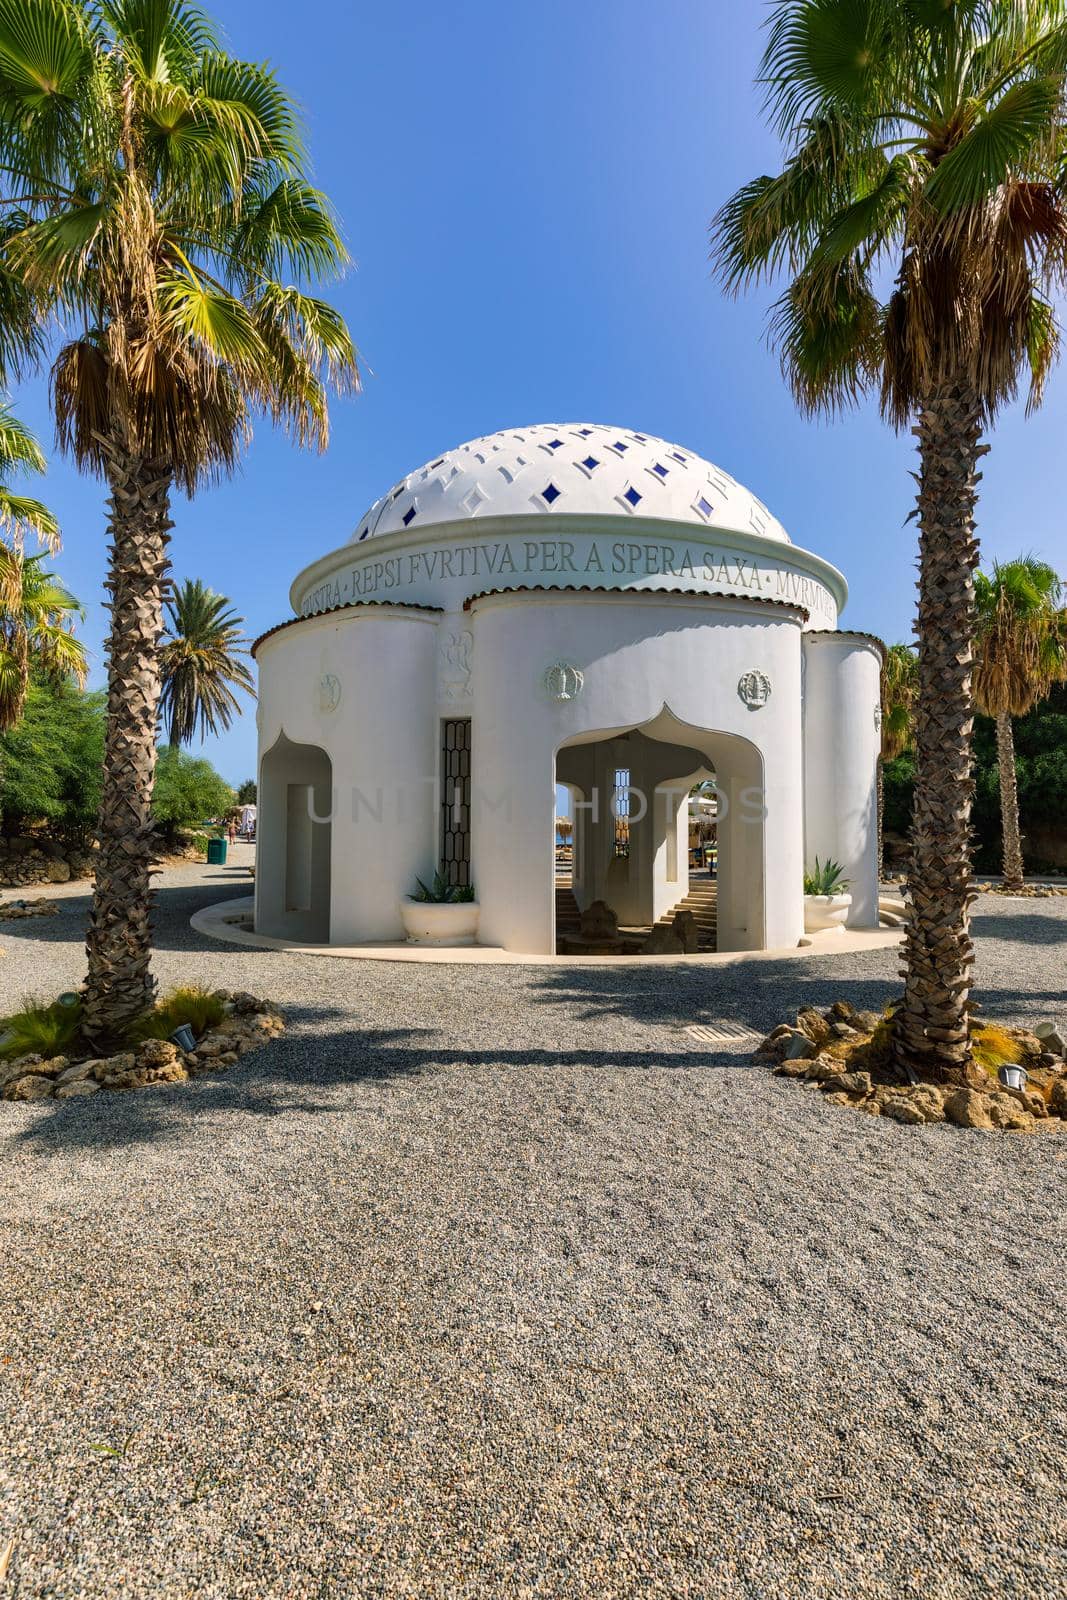 The beautiful buildings at Kalithea Springs constructed in the 1930s, Rhodes Island, Greece, Europe. Kallithea Therms, Kallithea Springs located at the bay of Kallithea on Rhodes island, Greece. 